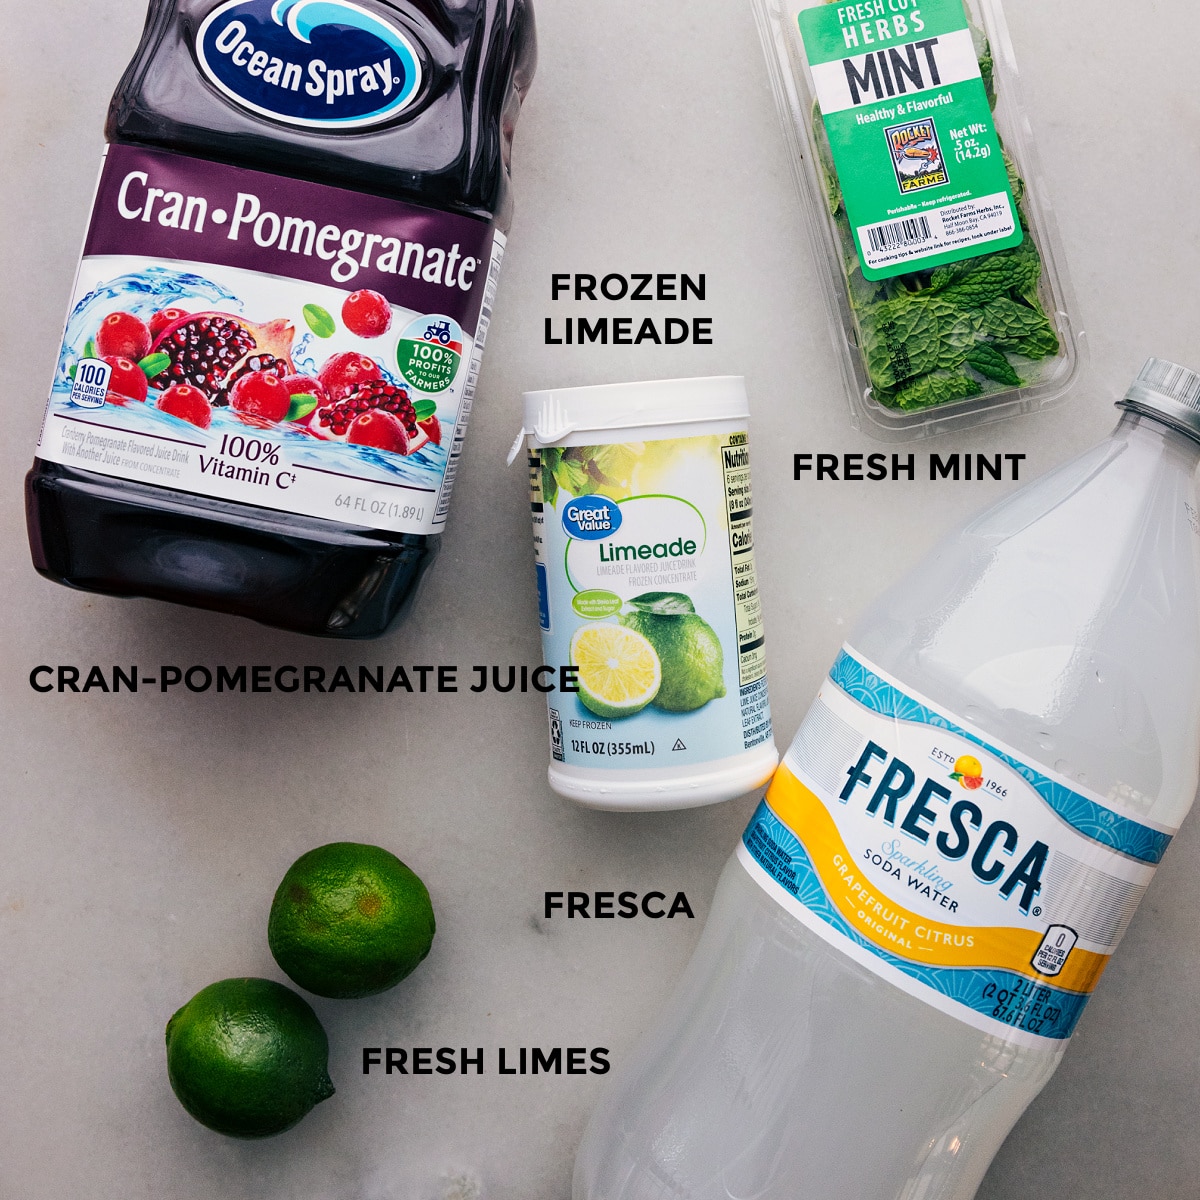 All the ingredients in this drink laid out ready to be be made into a delicious treat.